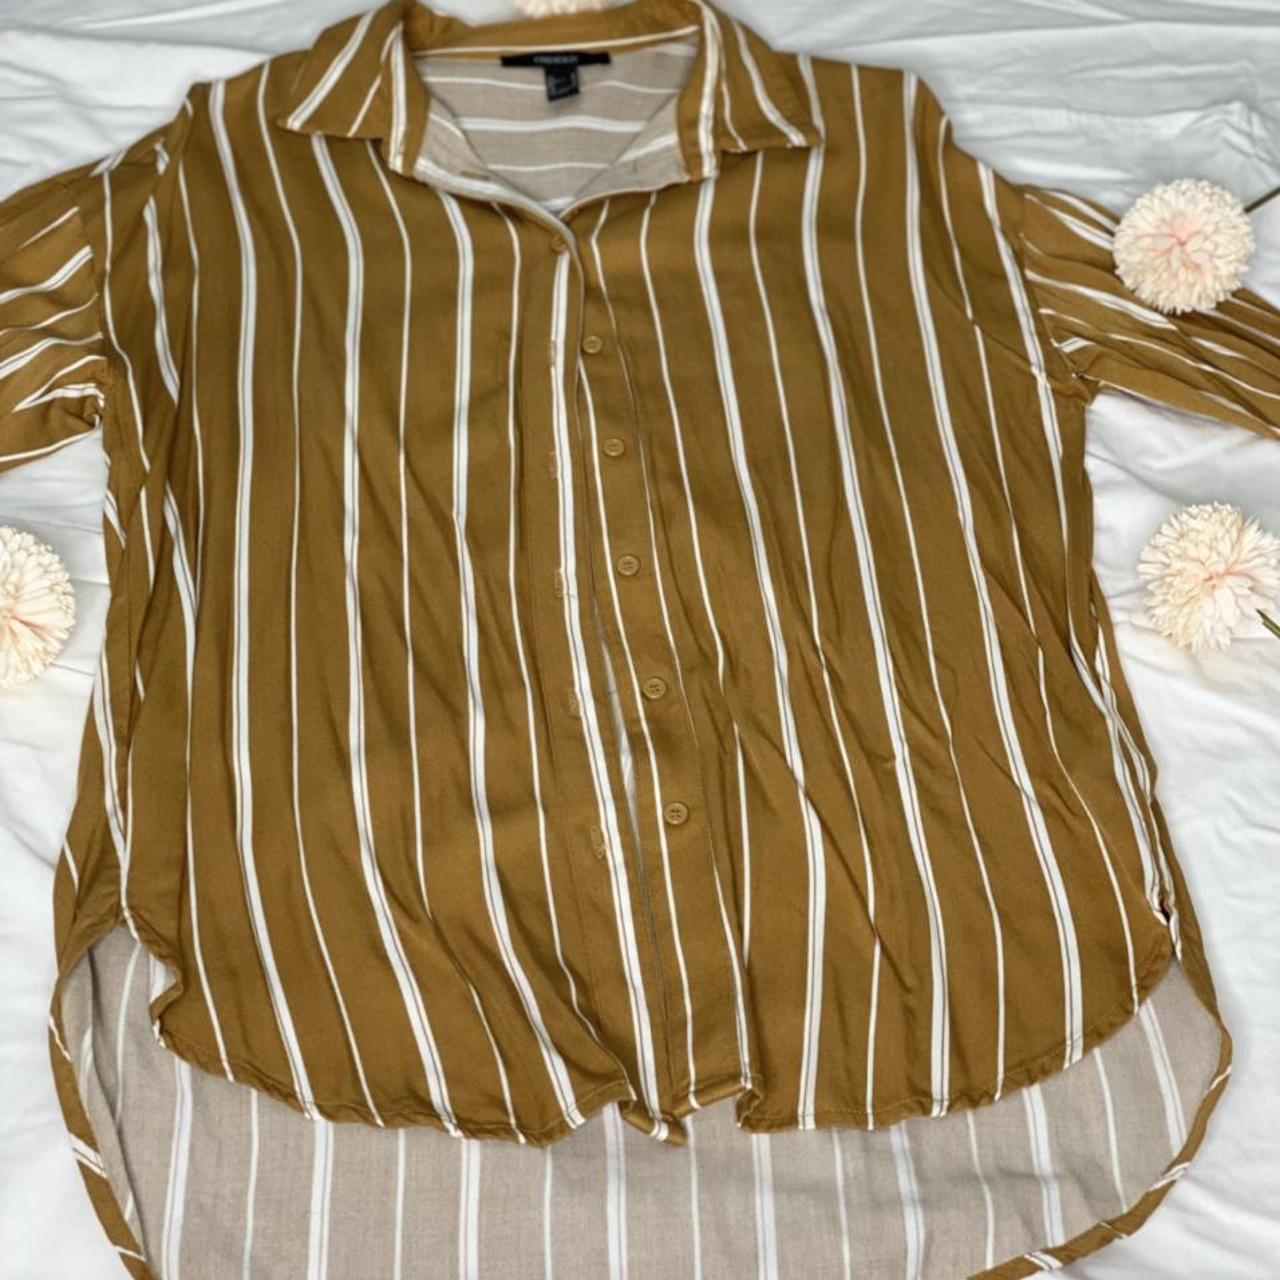 Forever 21 Women's White and Tan Blouse